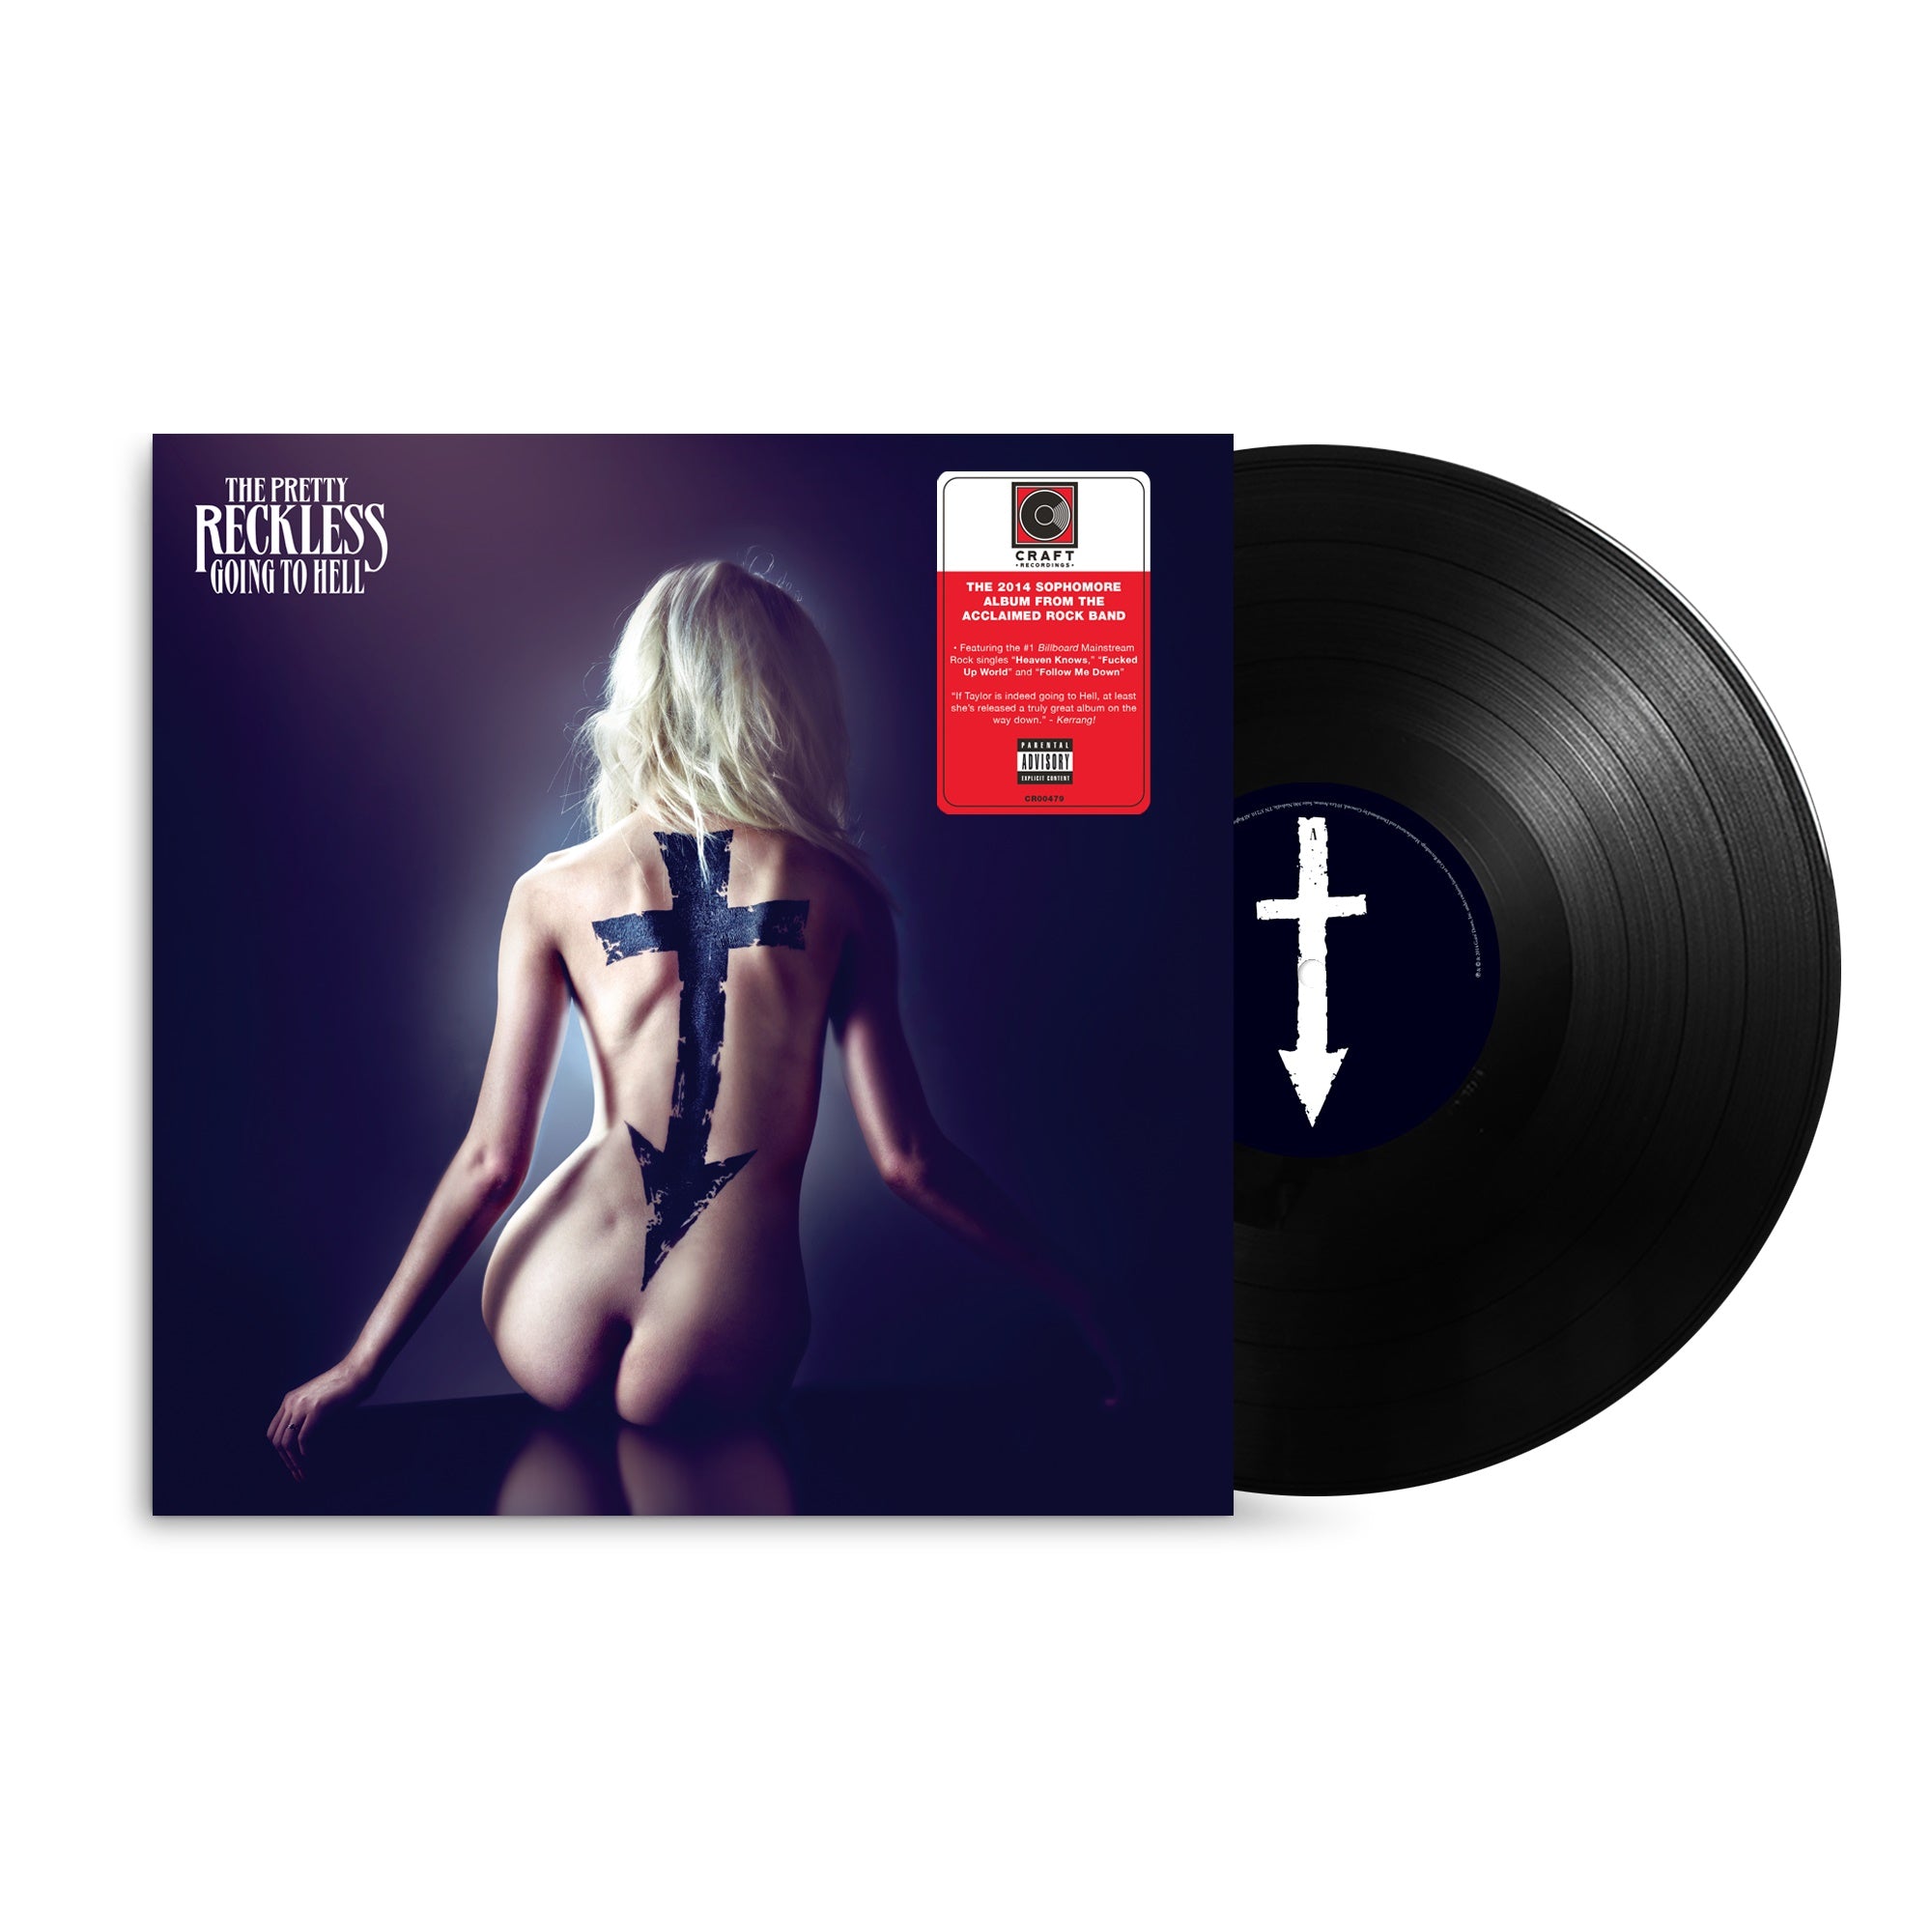 The Pretty Reckless | Going To Hell [Explicit Content] (Gatefold LP Jacket) | LP - 0